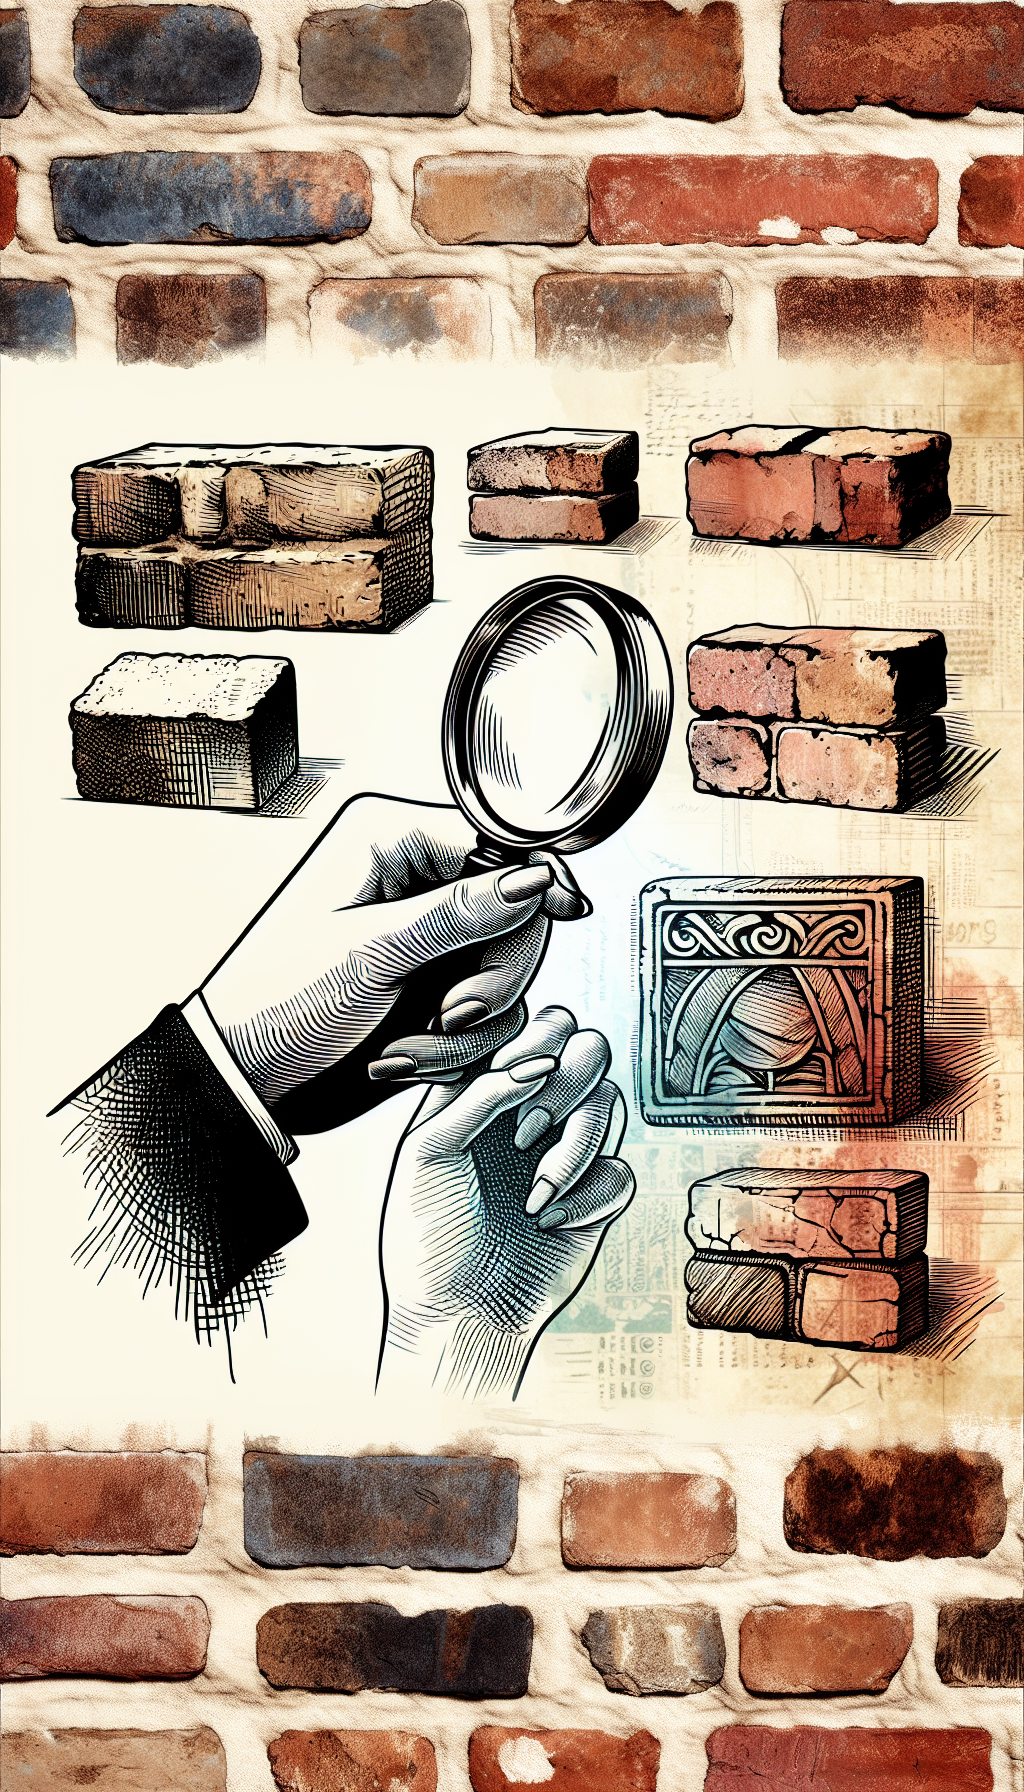 An elegant hand with a magnifying glass peers closely at a patchwork of vintage bricks, each adorned with distinct markings – an artisan's signature, a timeless stamp, or a unique patina. Varied styles, such as line art for the hand and watercolor for the bricks, highlight the blend of craftsmanship and historical value.